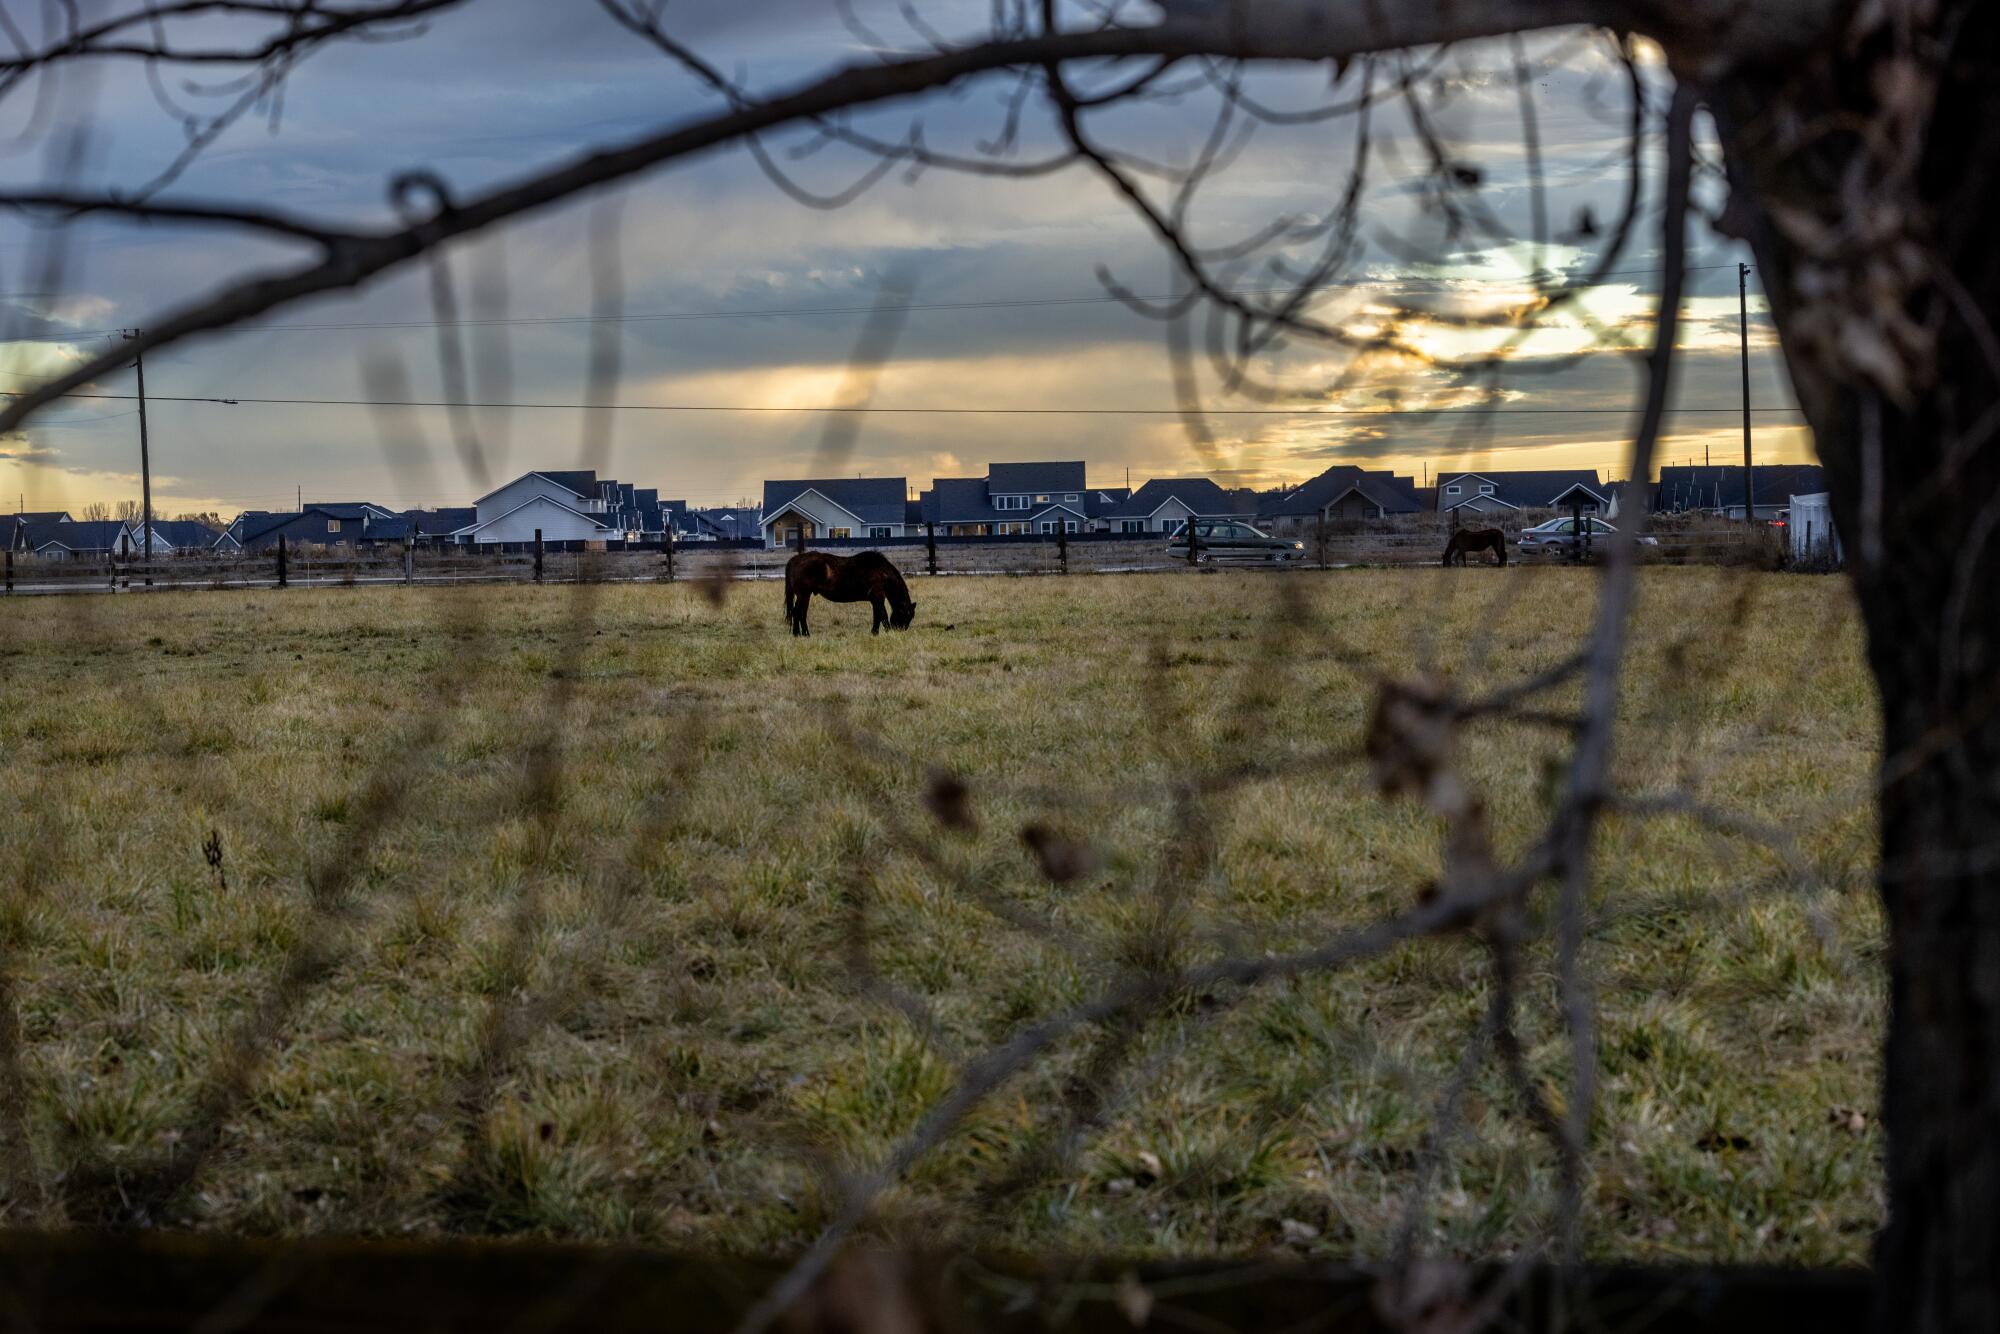 A horse grazes next to a new housing development in Eagle, Idaho.